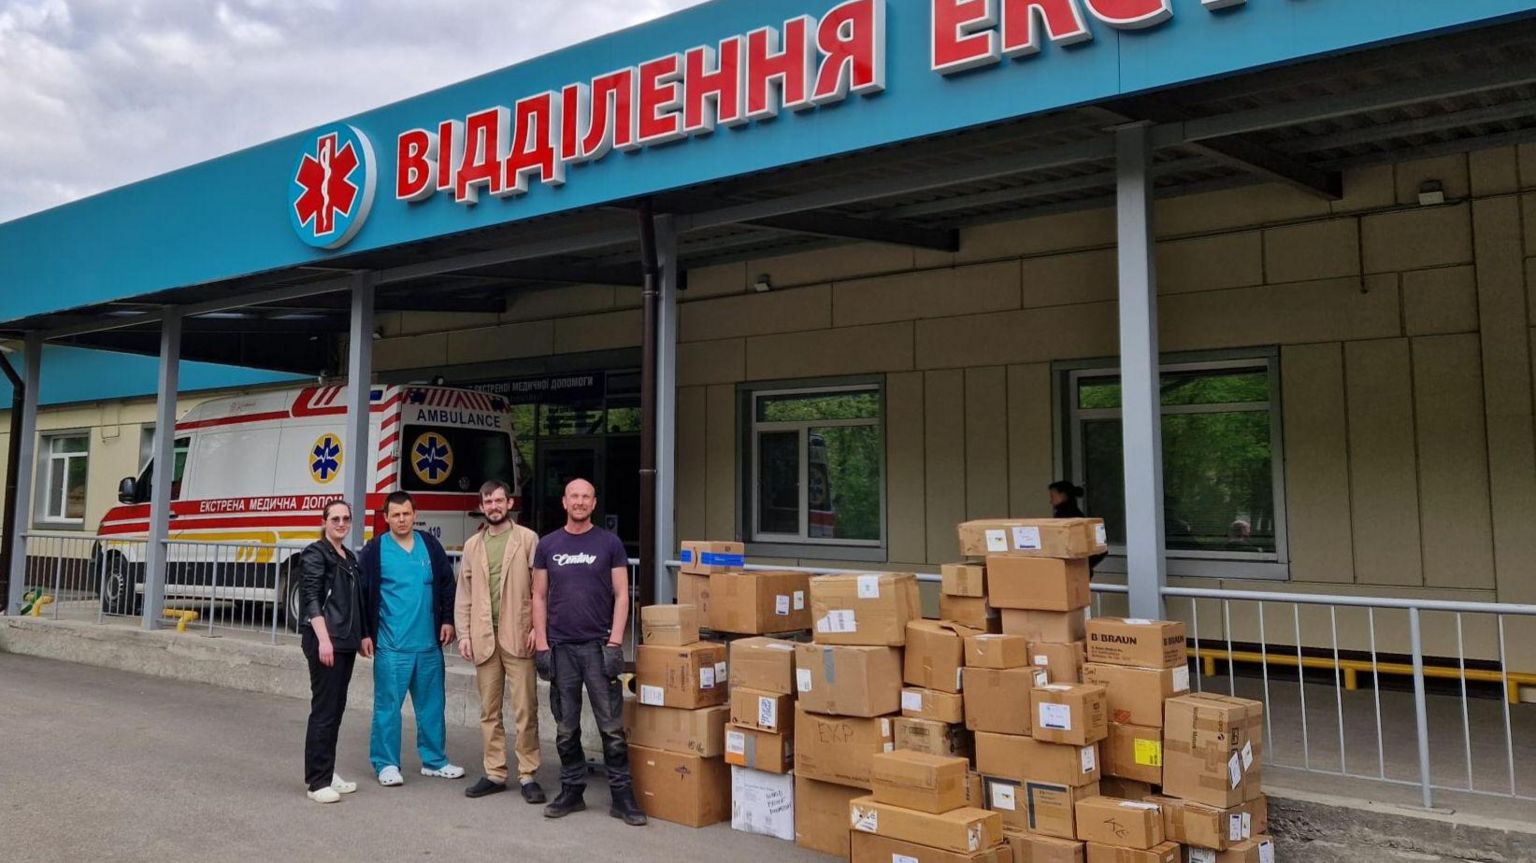 Brian and Helen Hammond in Ukraine, next to boxes of donated aid items